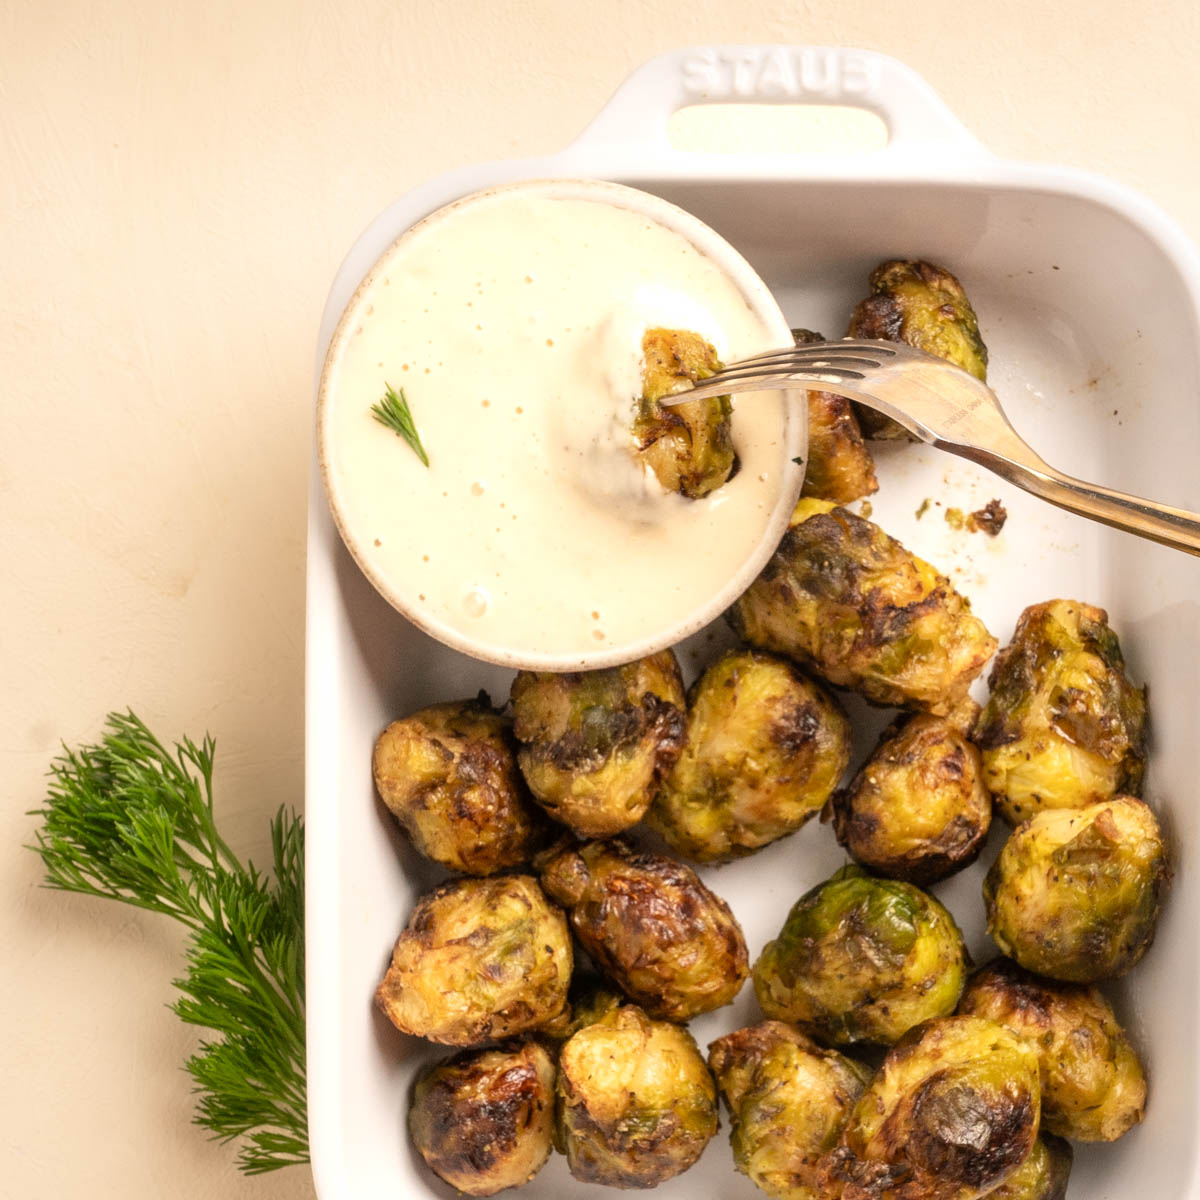 A stoneware bowl with a creamy Horseradish Aioli inside a casserole dish with air fried brussel sprouts. A fork is dipping one Brussel Sprout into the dip.